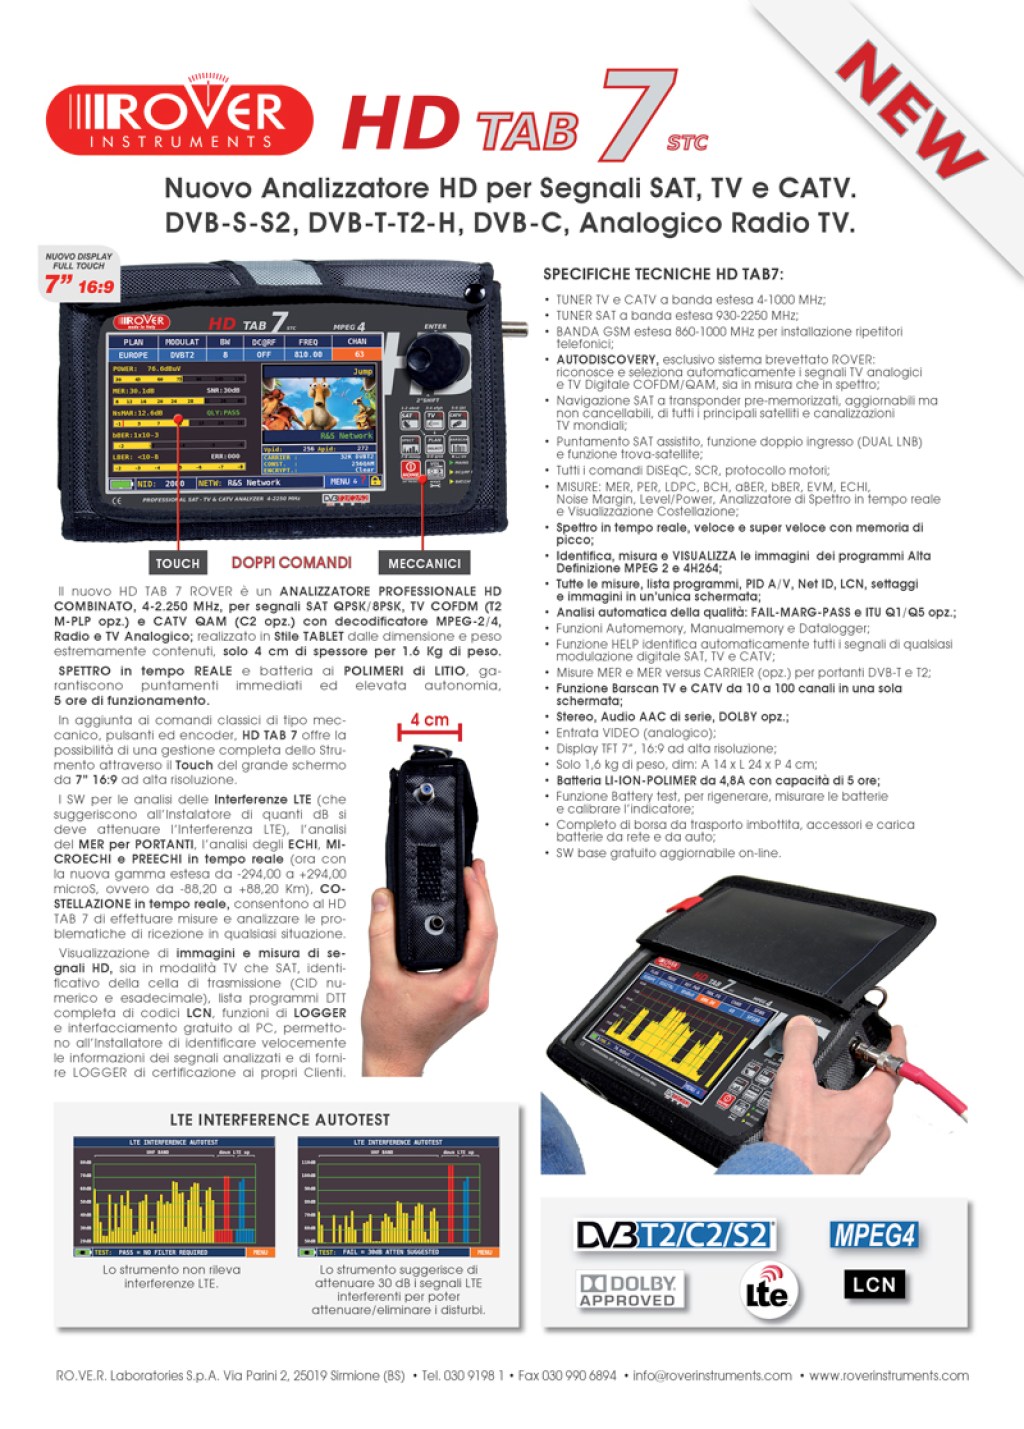 Picture of: ROVER HD TAB  STC advertorial – Rover Laboratories